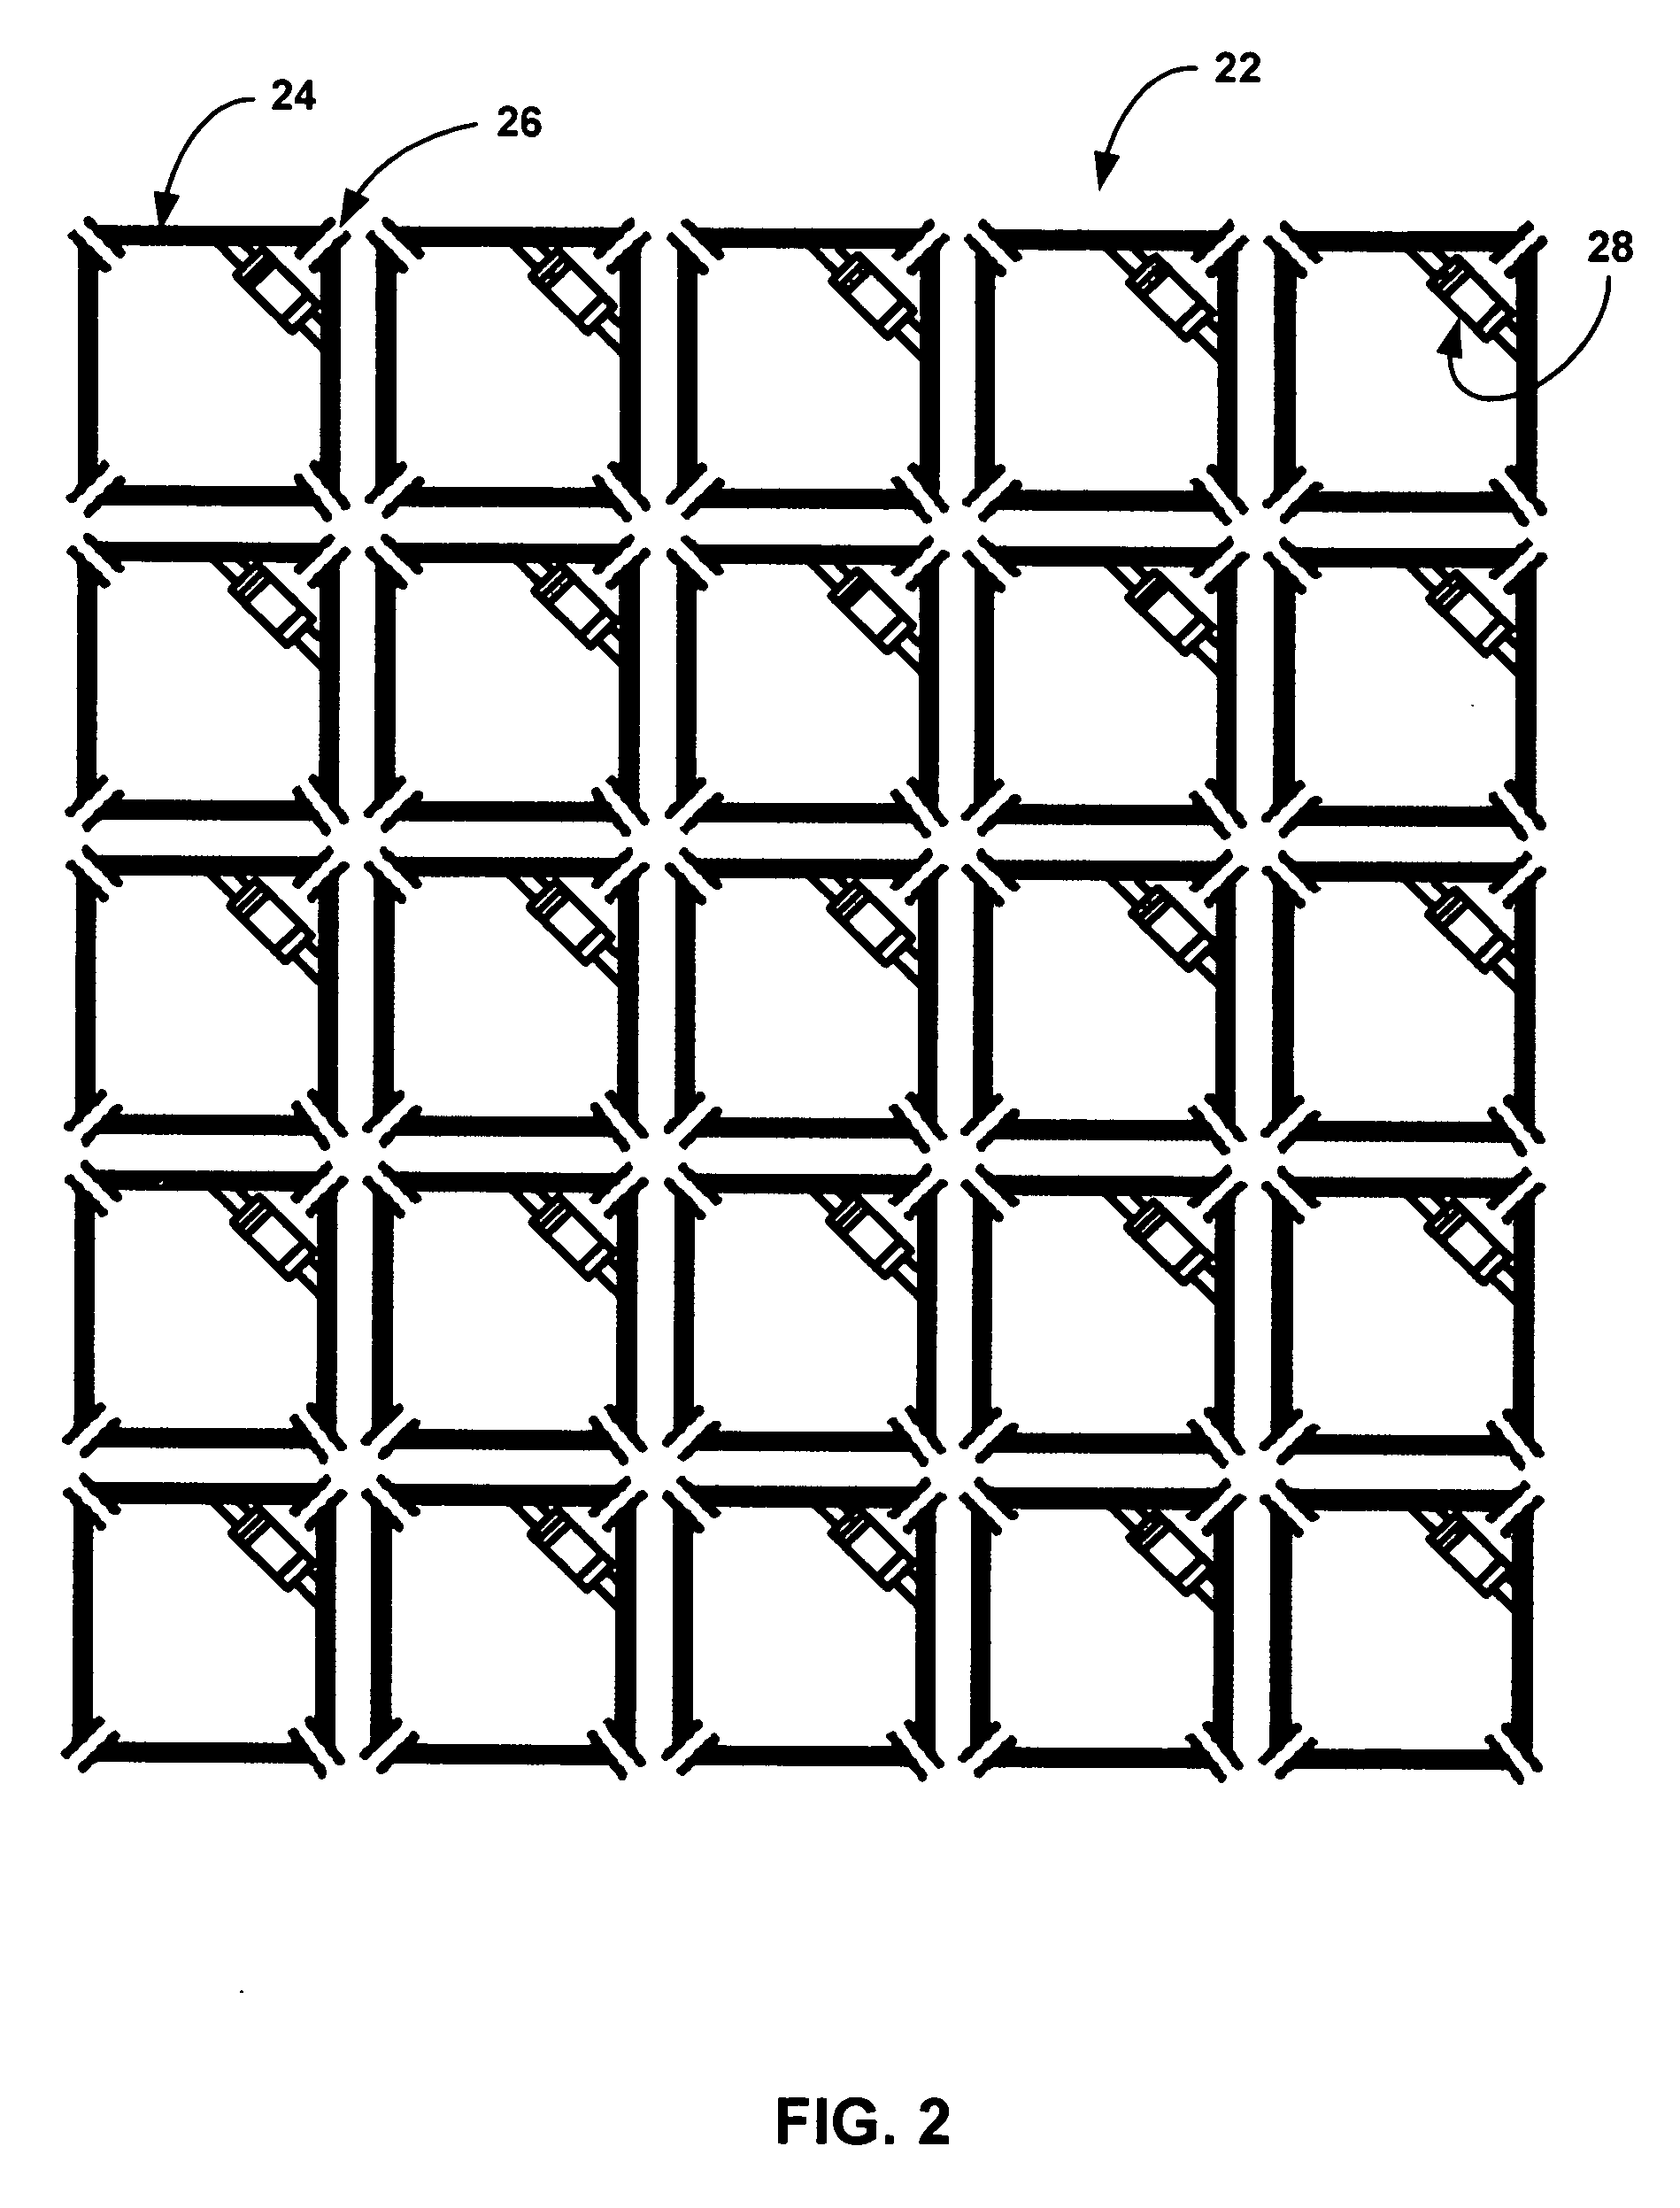 High-pass two-dimensional ladder network resonator